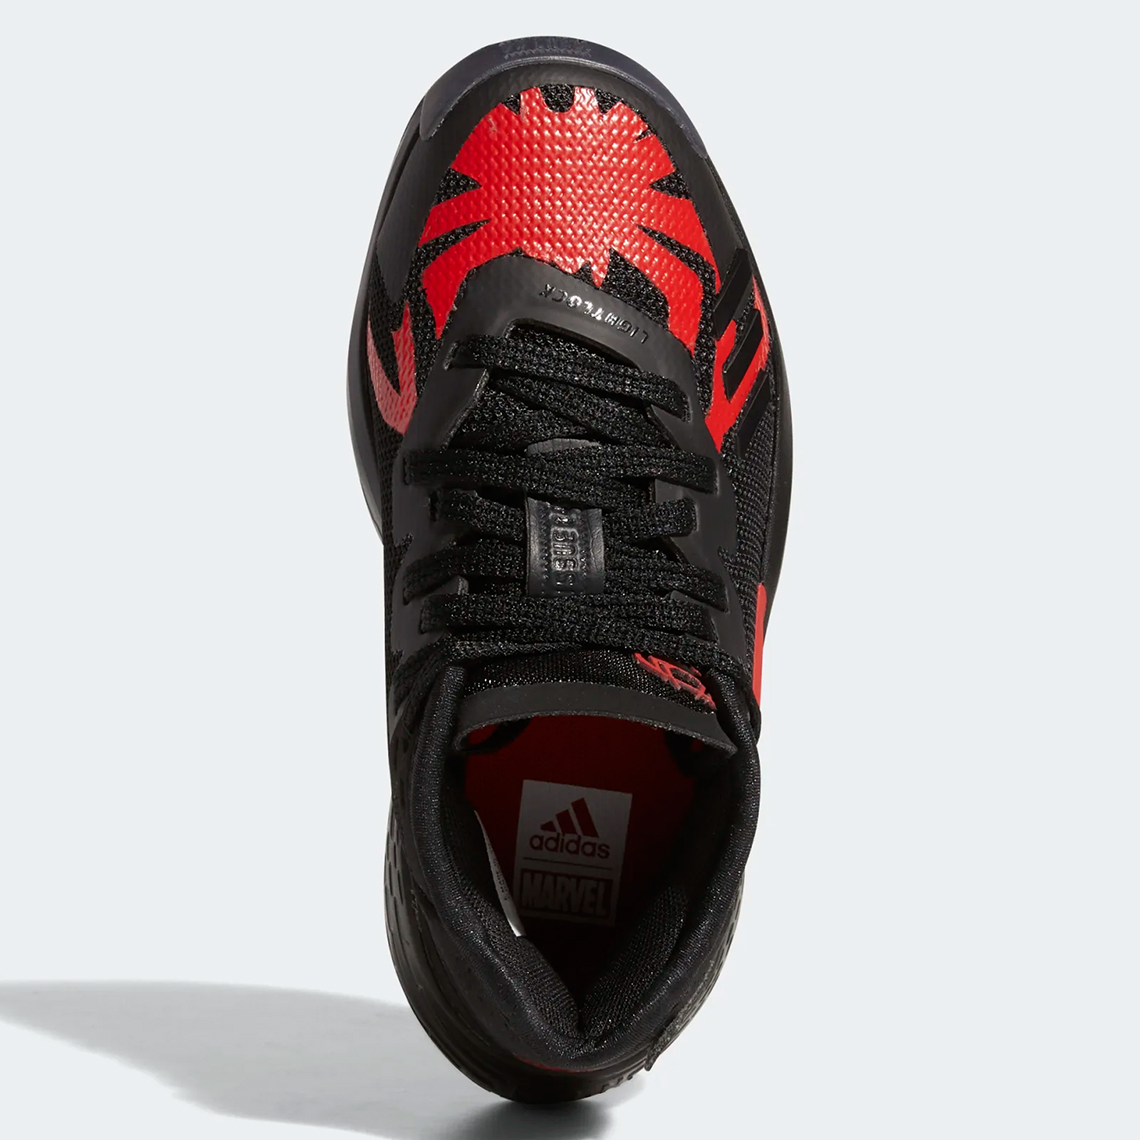 Spider Man Adidas Don Issue 4 Miles Morales Hr1627 2